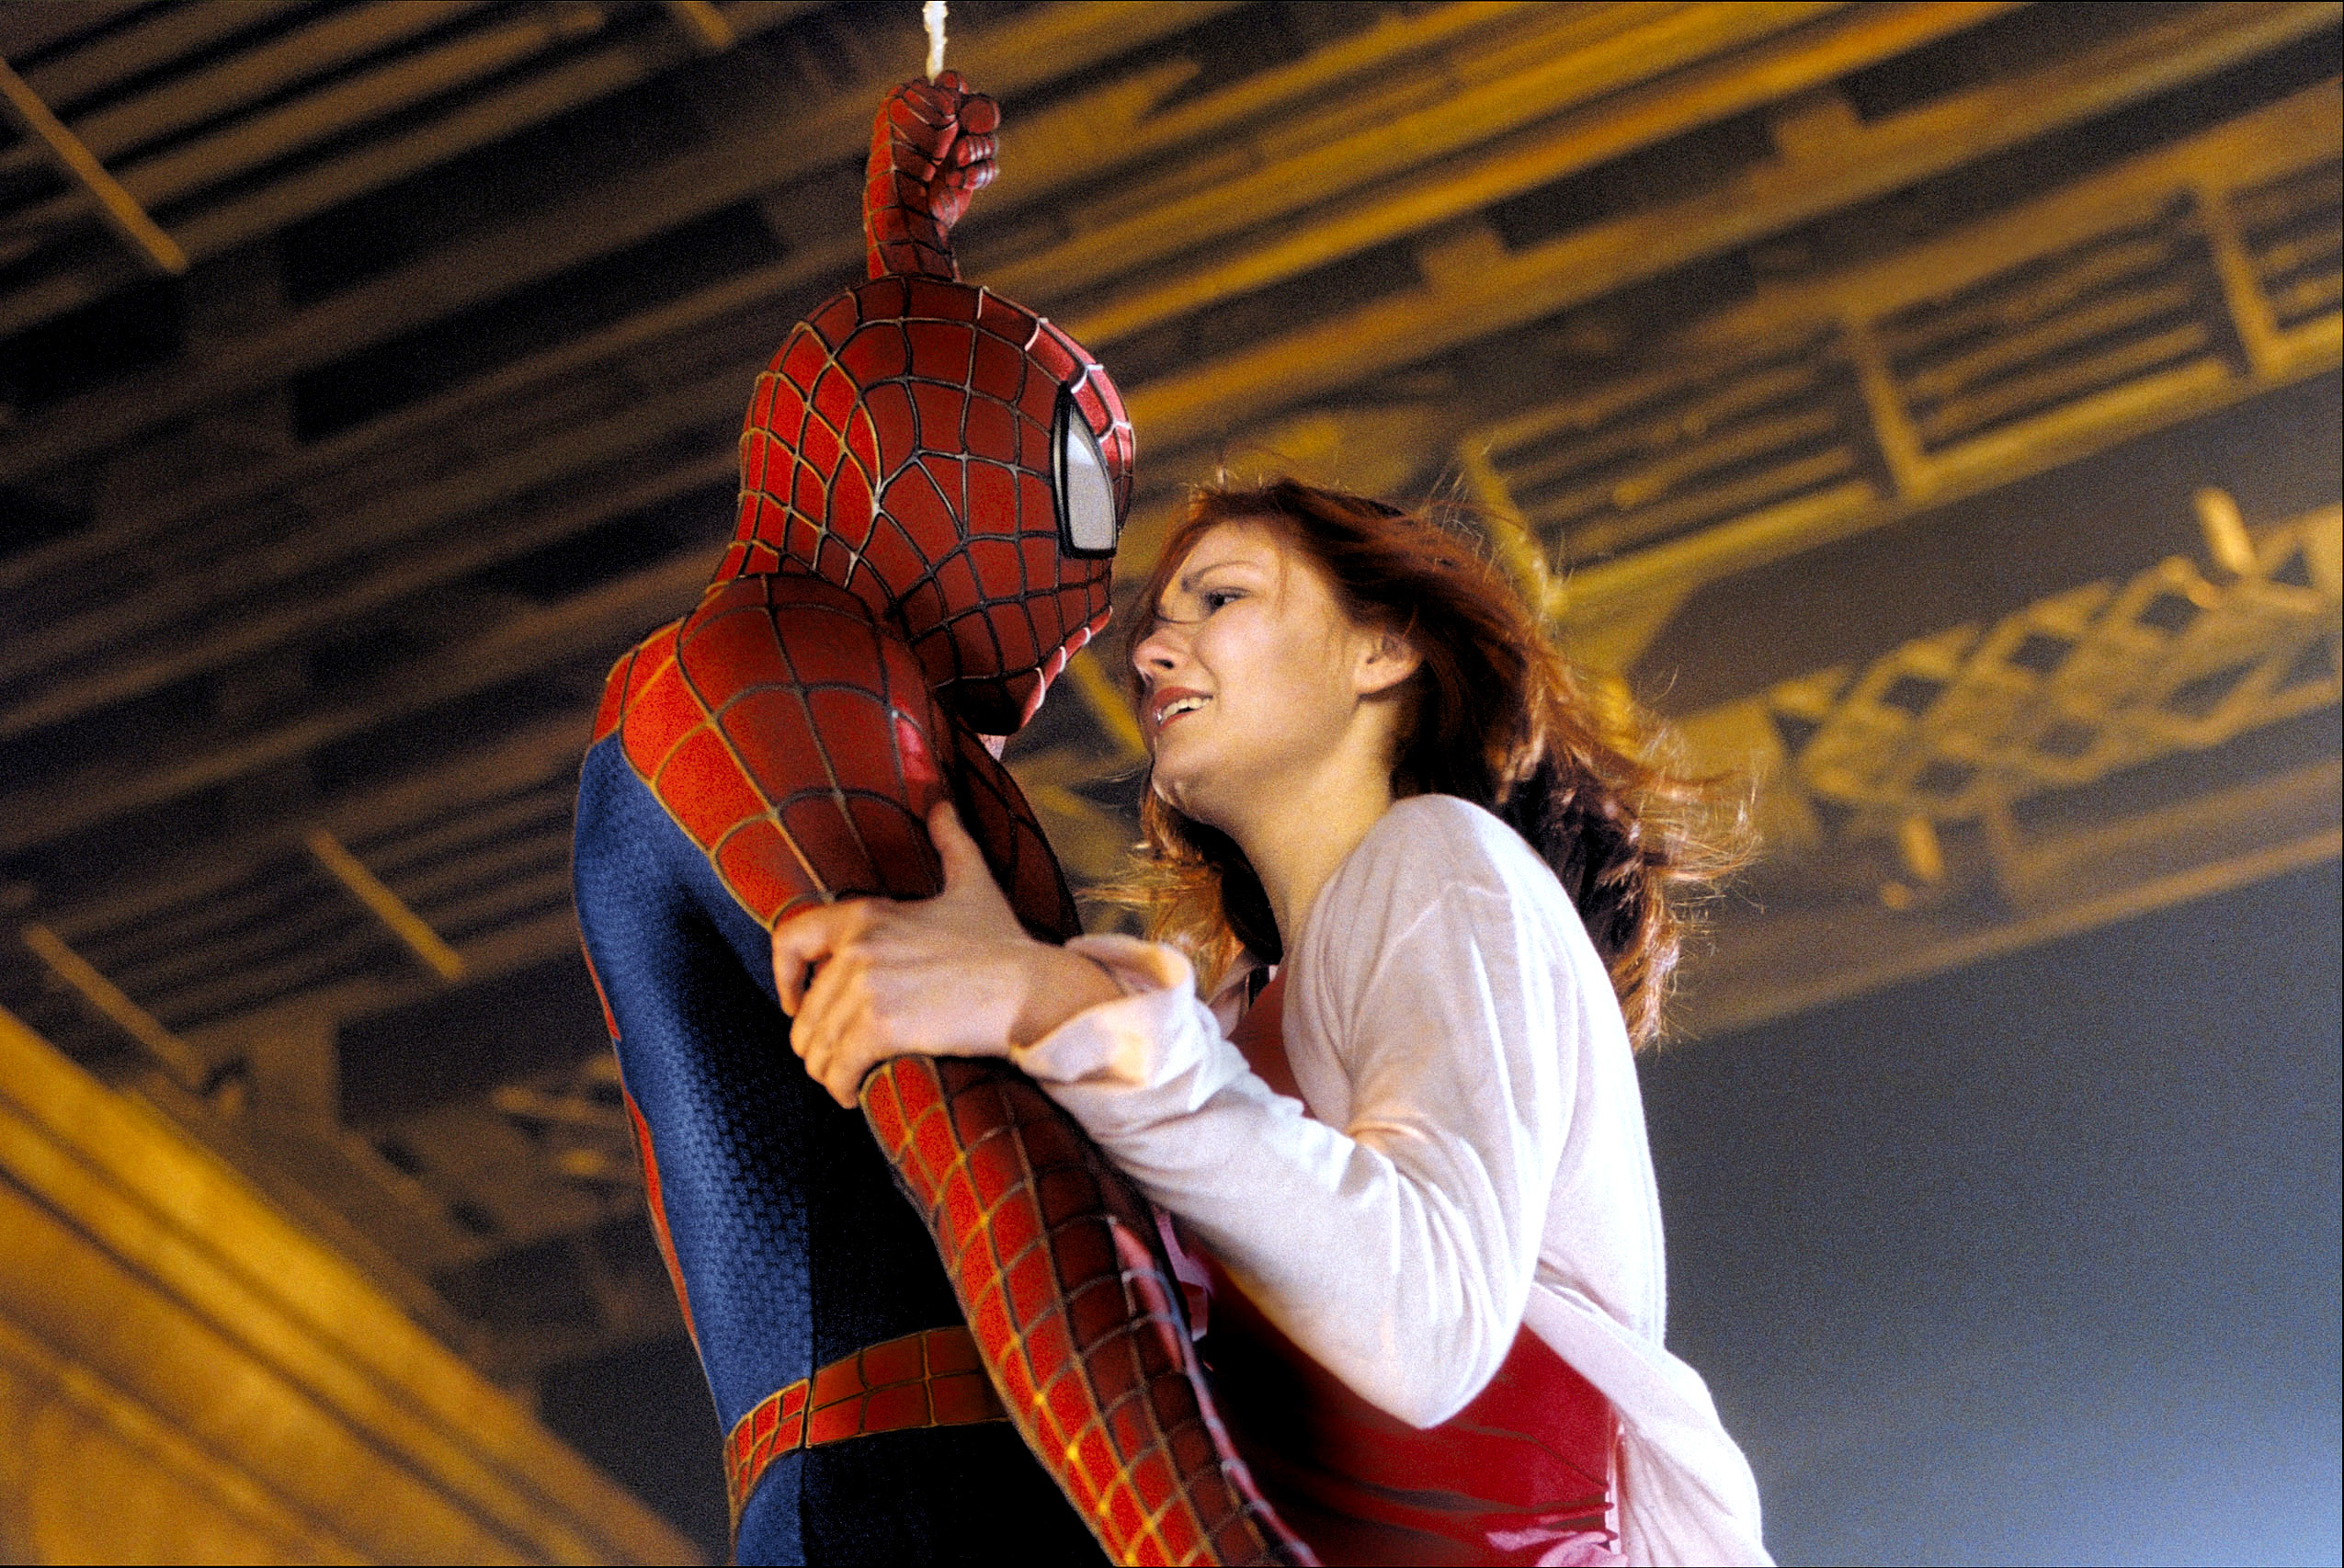 Spider-Man in costume holds Mary Jane, who is wearing a layered top, during a movie scene